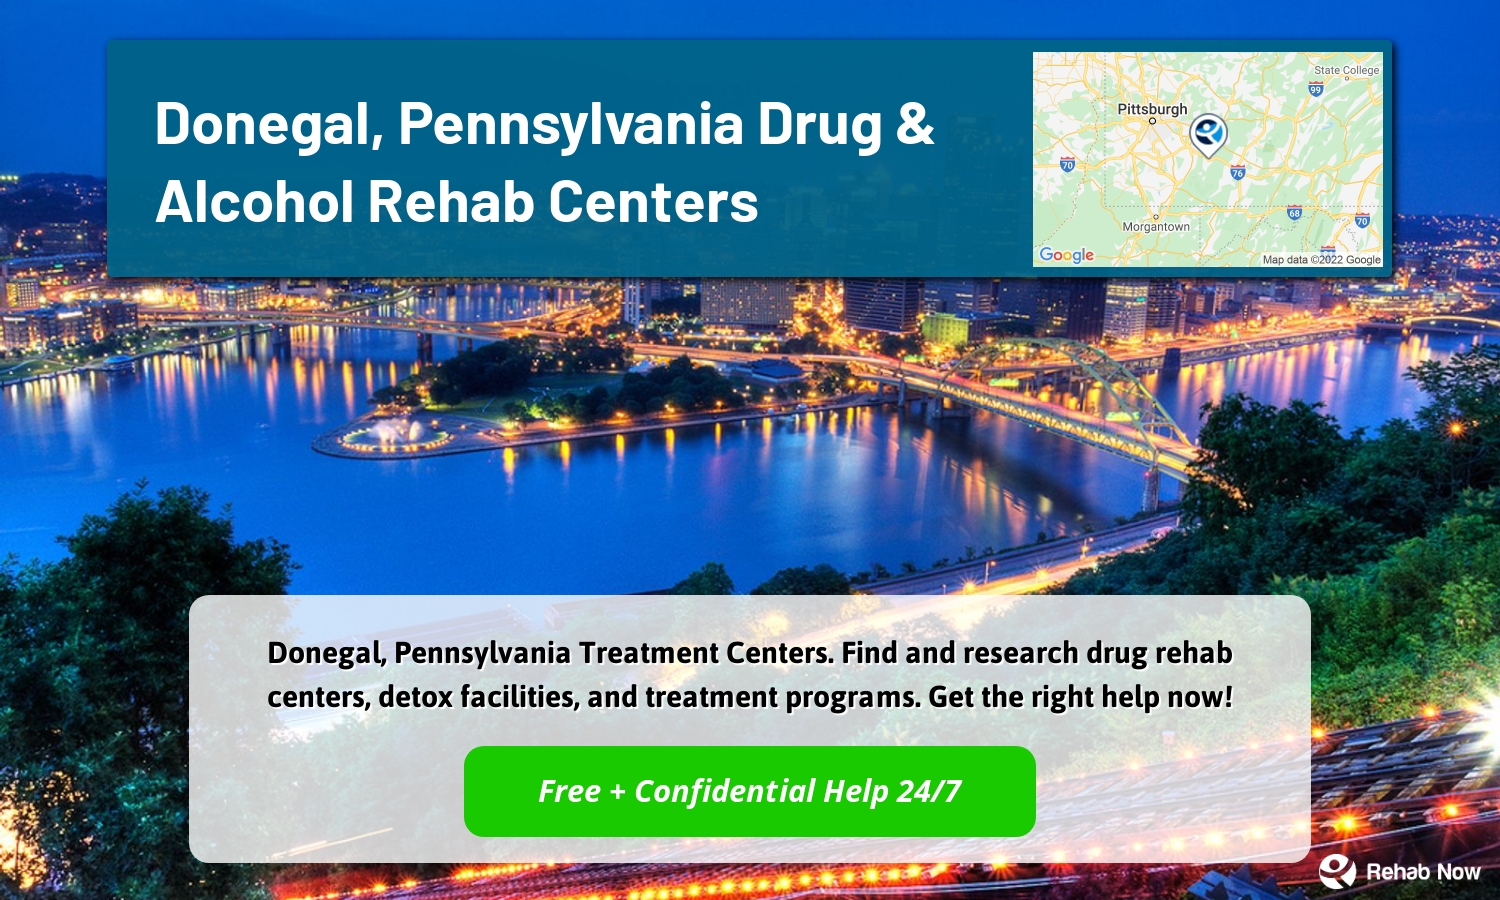 Donegal, Pennsylvania Treatment Centers. Find and research drug rehab centers, detox facilities, and treatment programs. Get the right help now!